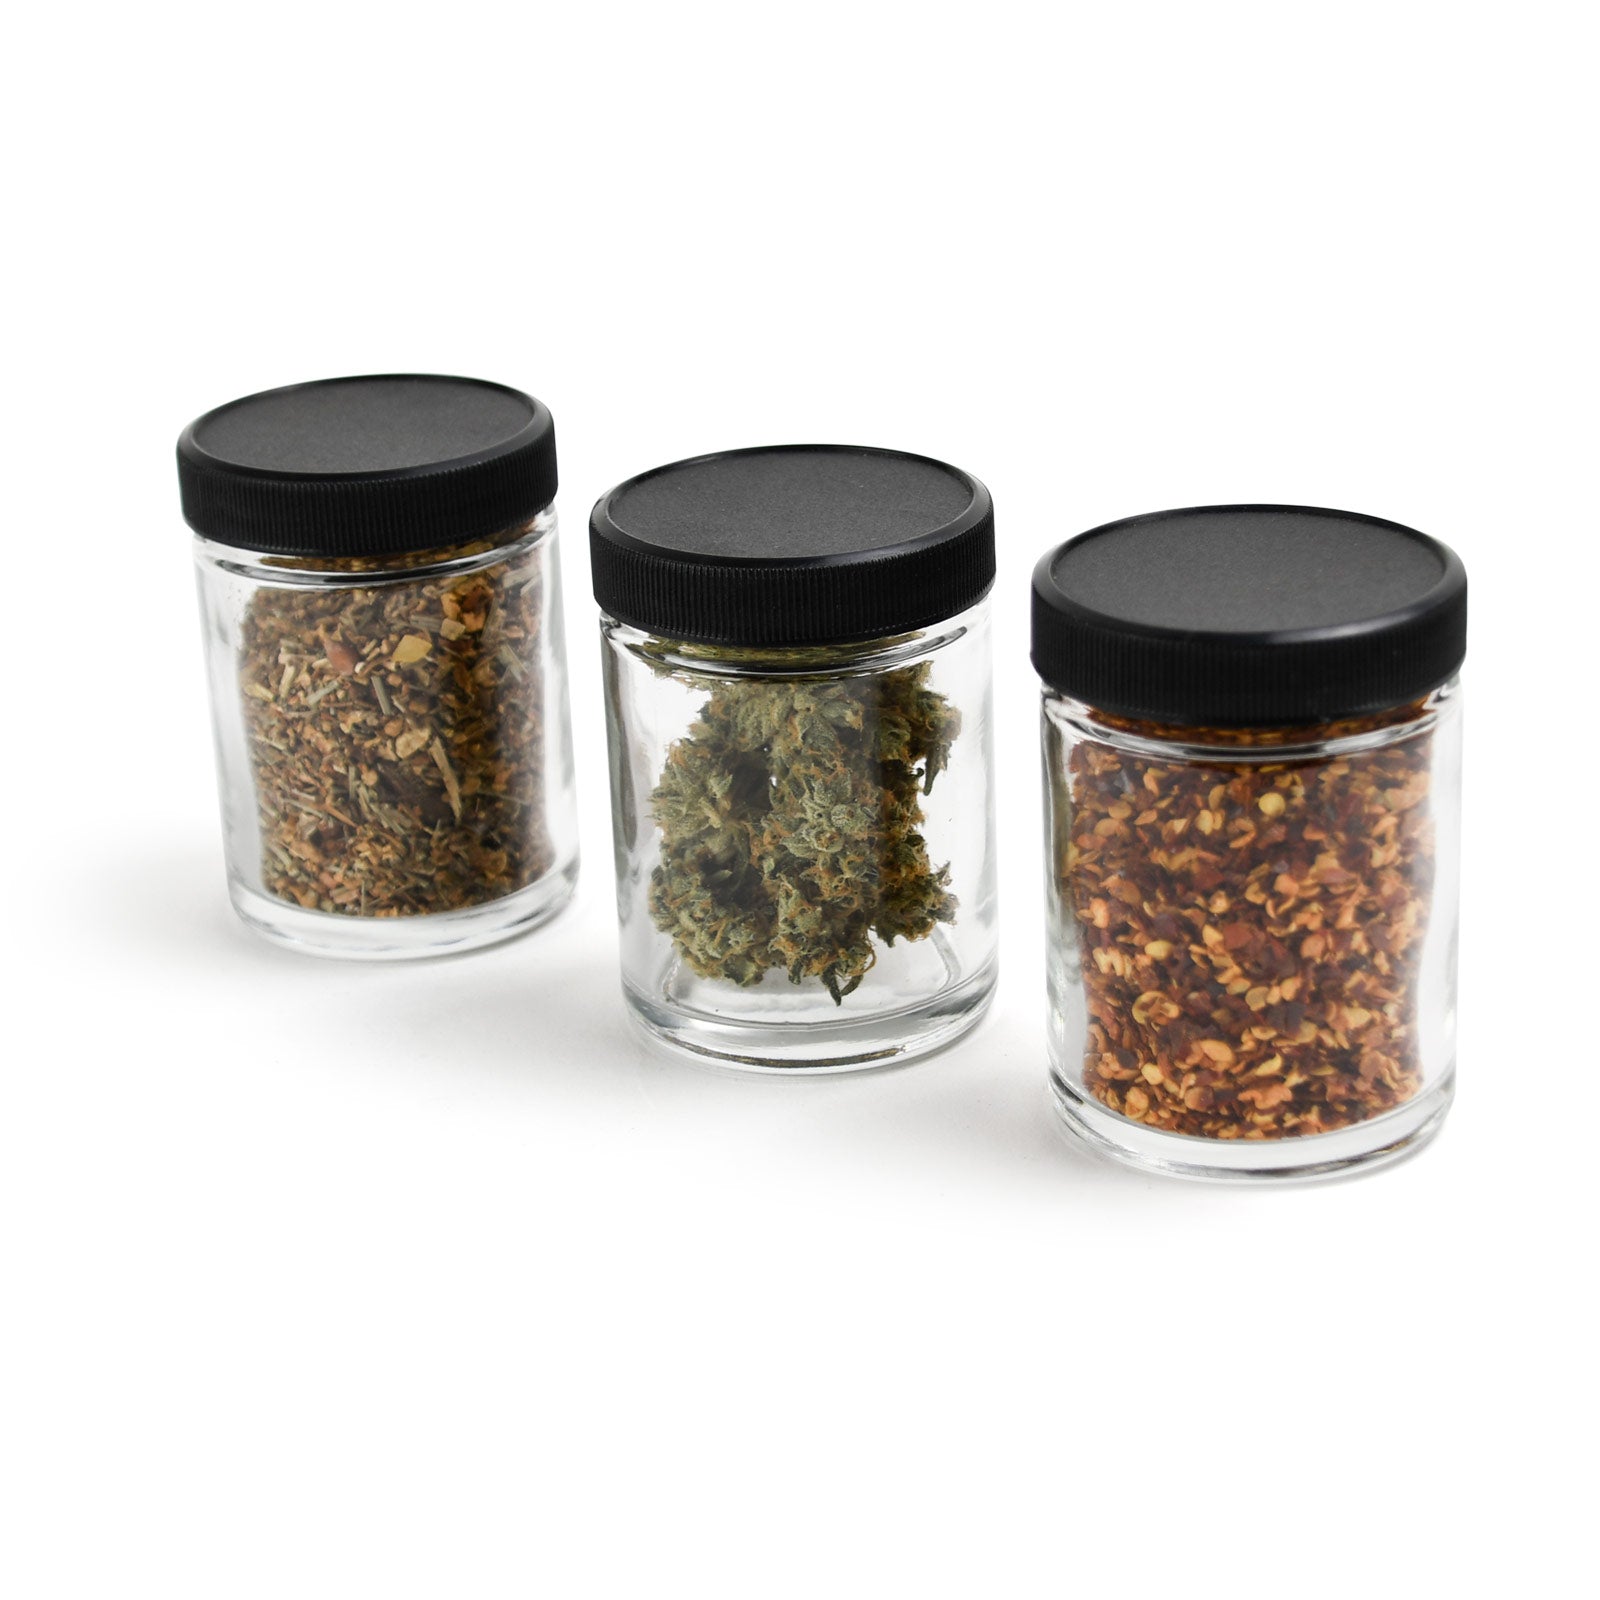 4oz Glass Jars With Black Caps - 7 Grams - 1 Count